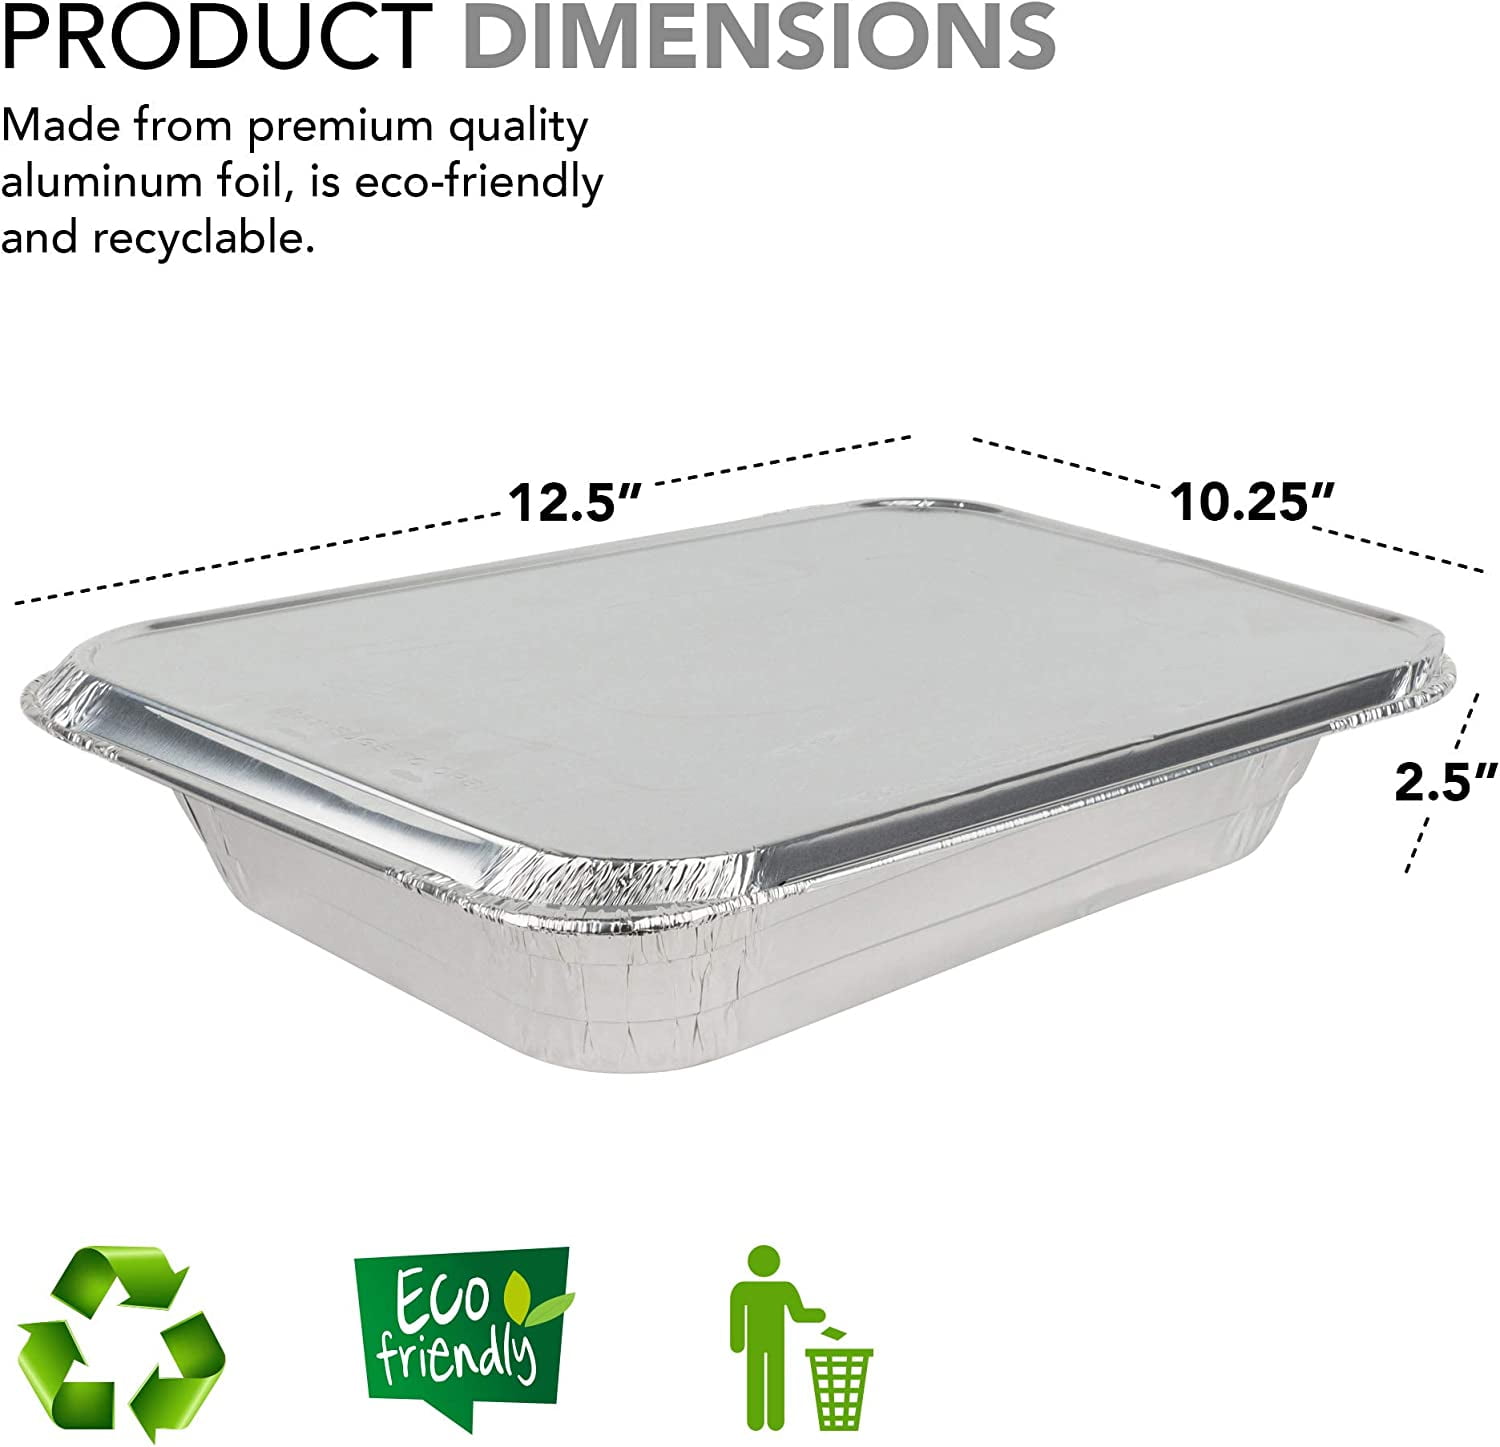 Foil Tray with Lid (52 x 32cm)